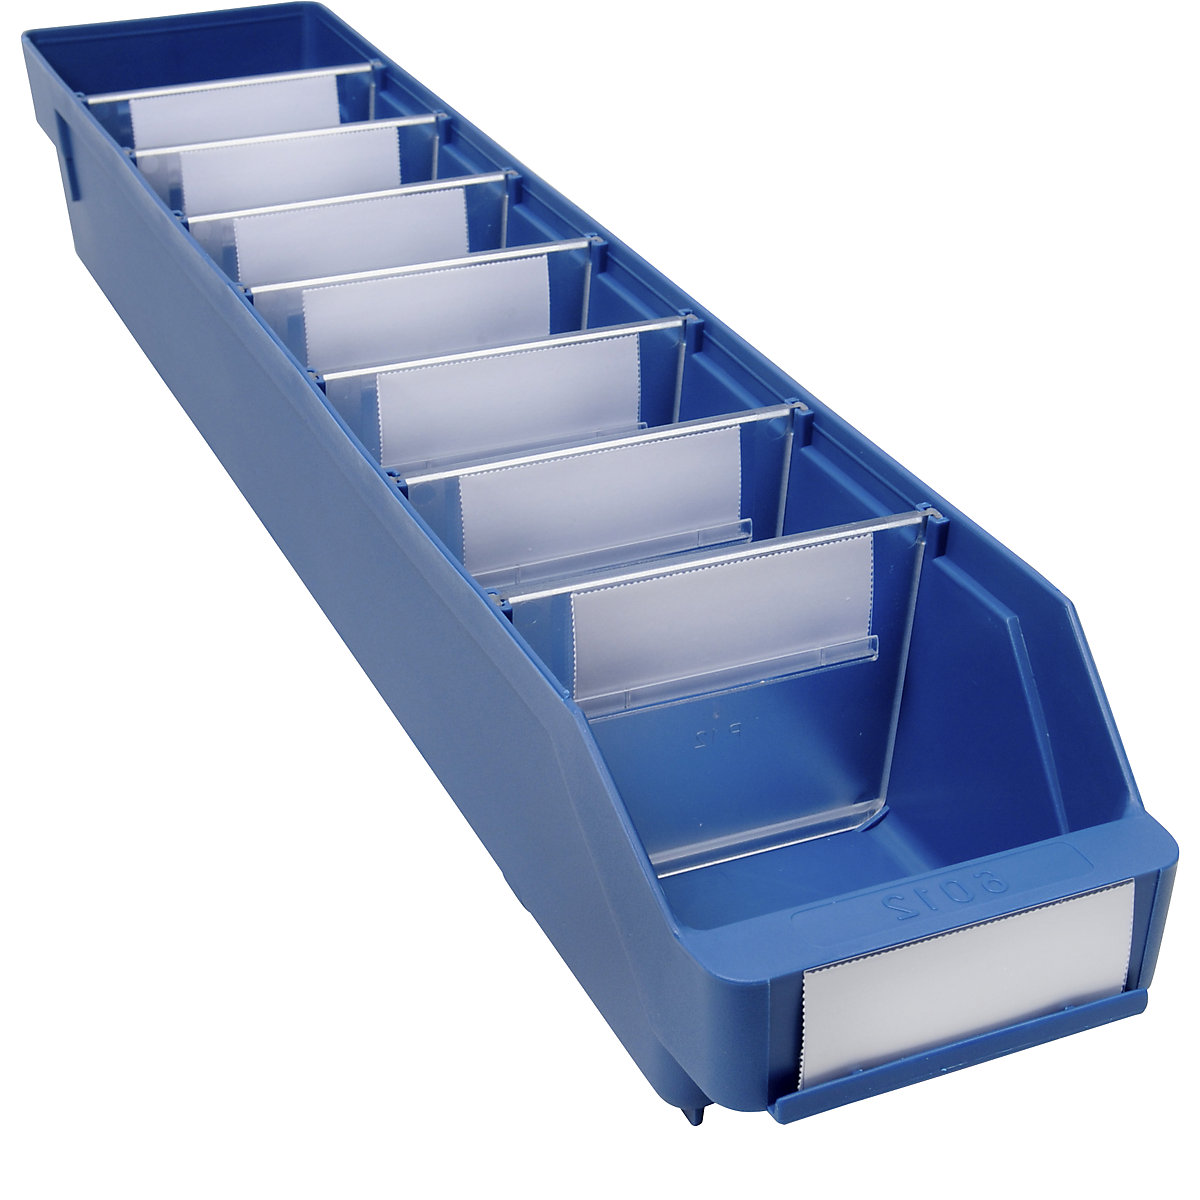 Shelf bin made of highly impact resistant polypropylene – STEMO, blue, LxWxH 600 x 118 x 95 mm, pack of 30-17